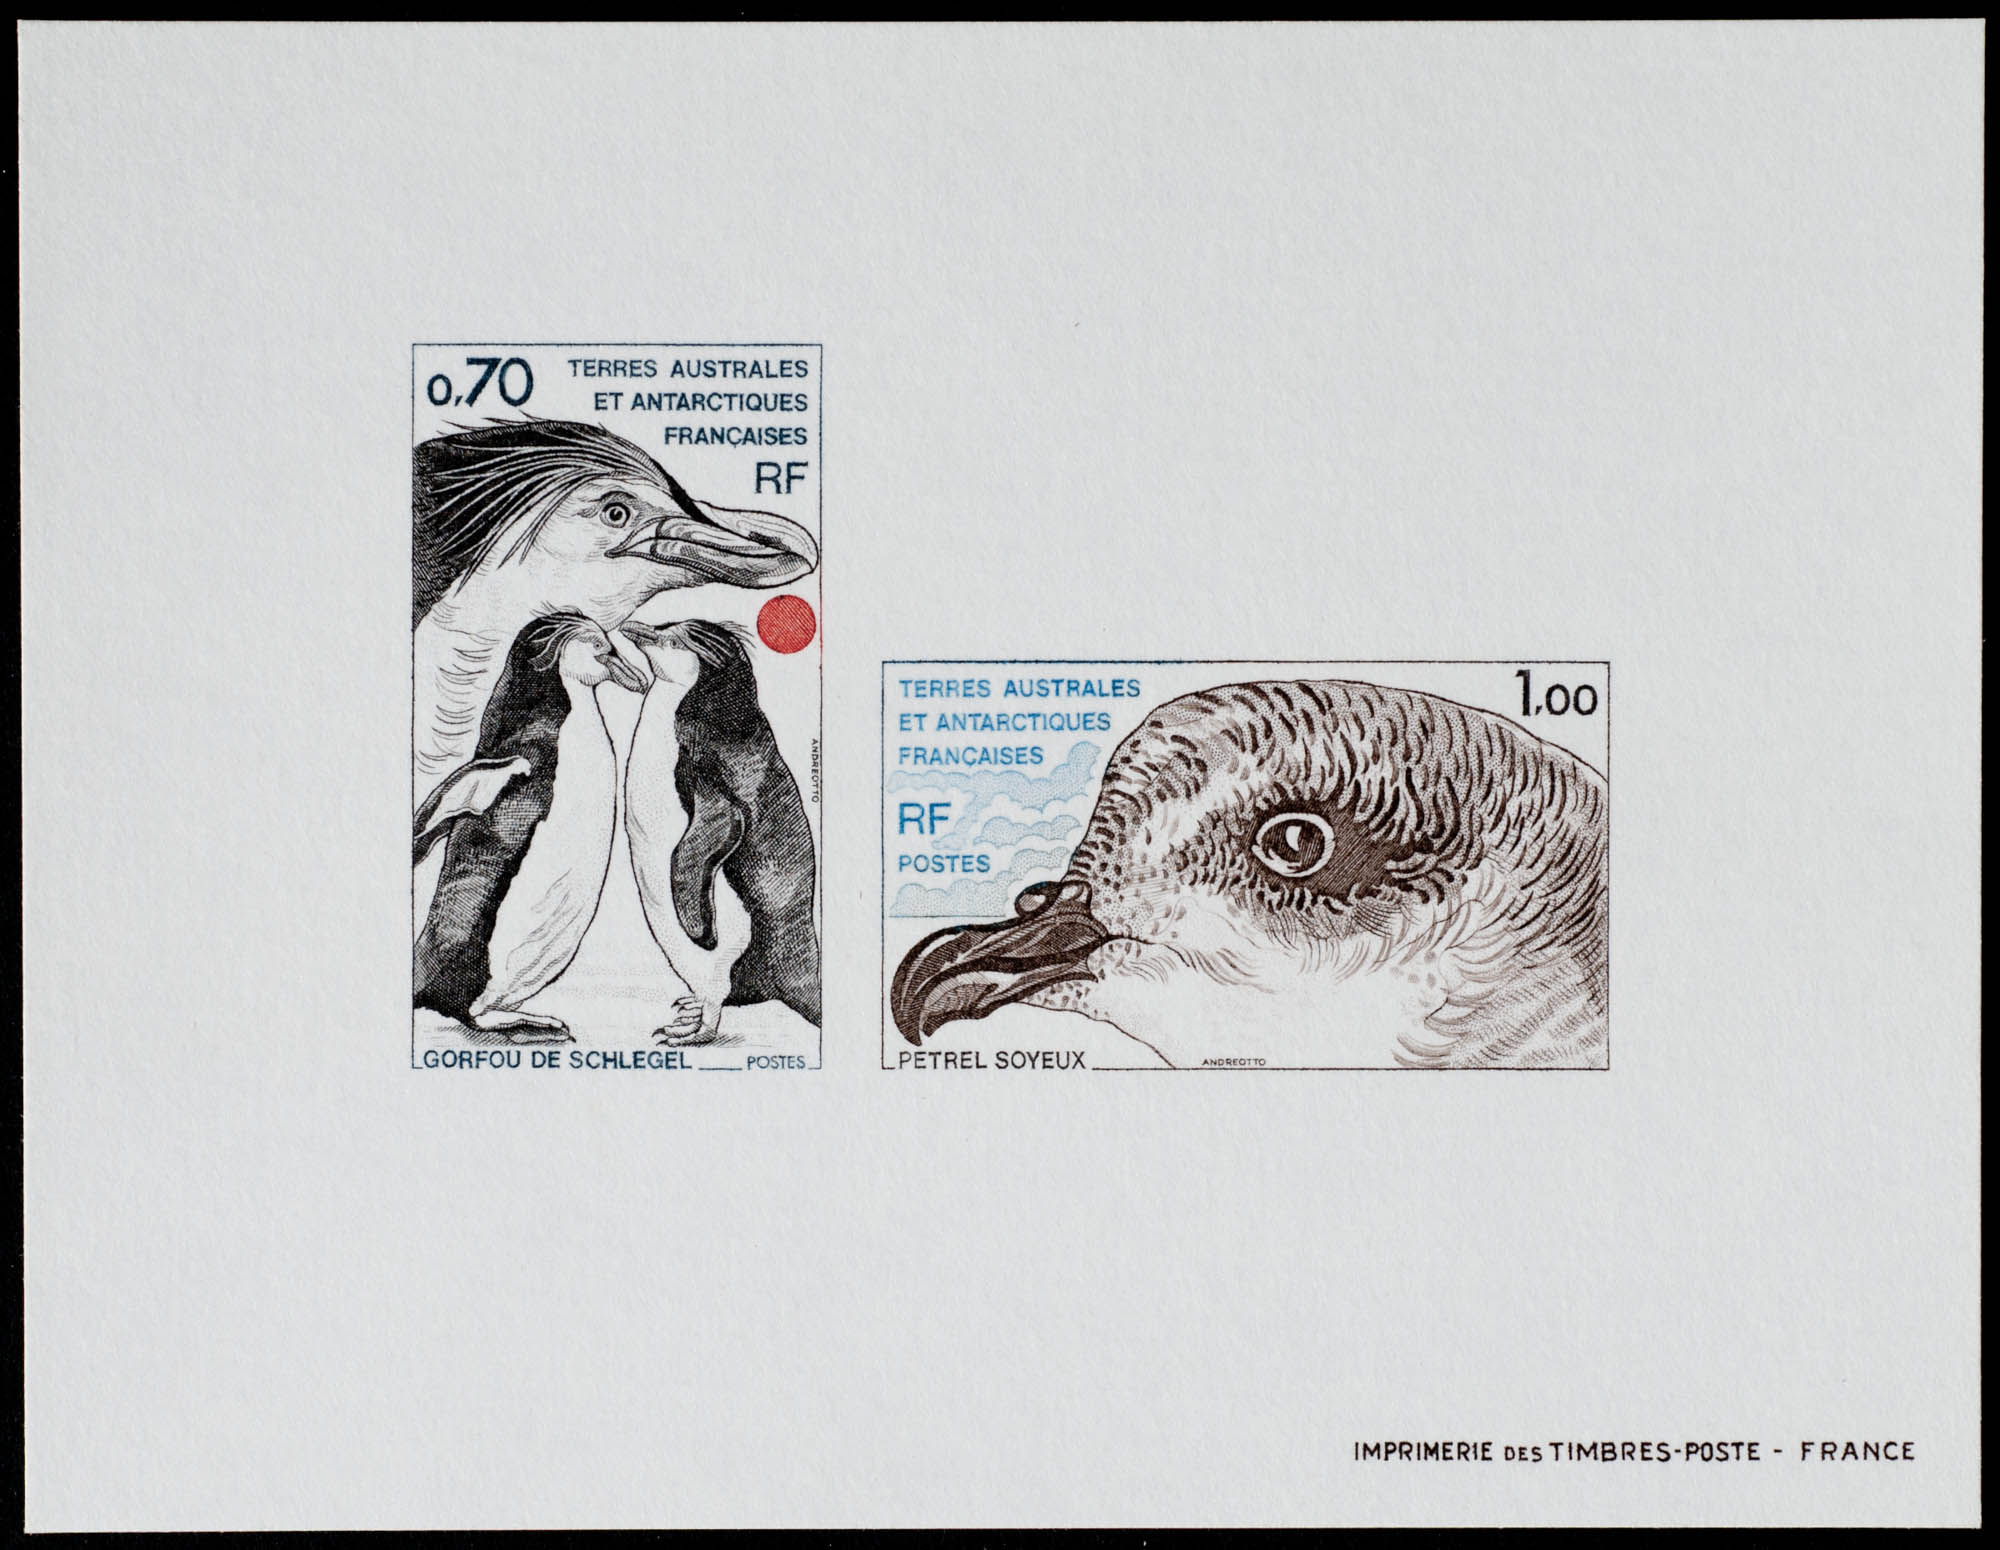 FSAT collective deluxe proof - penguins and petrel